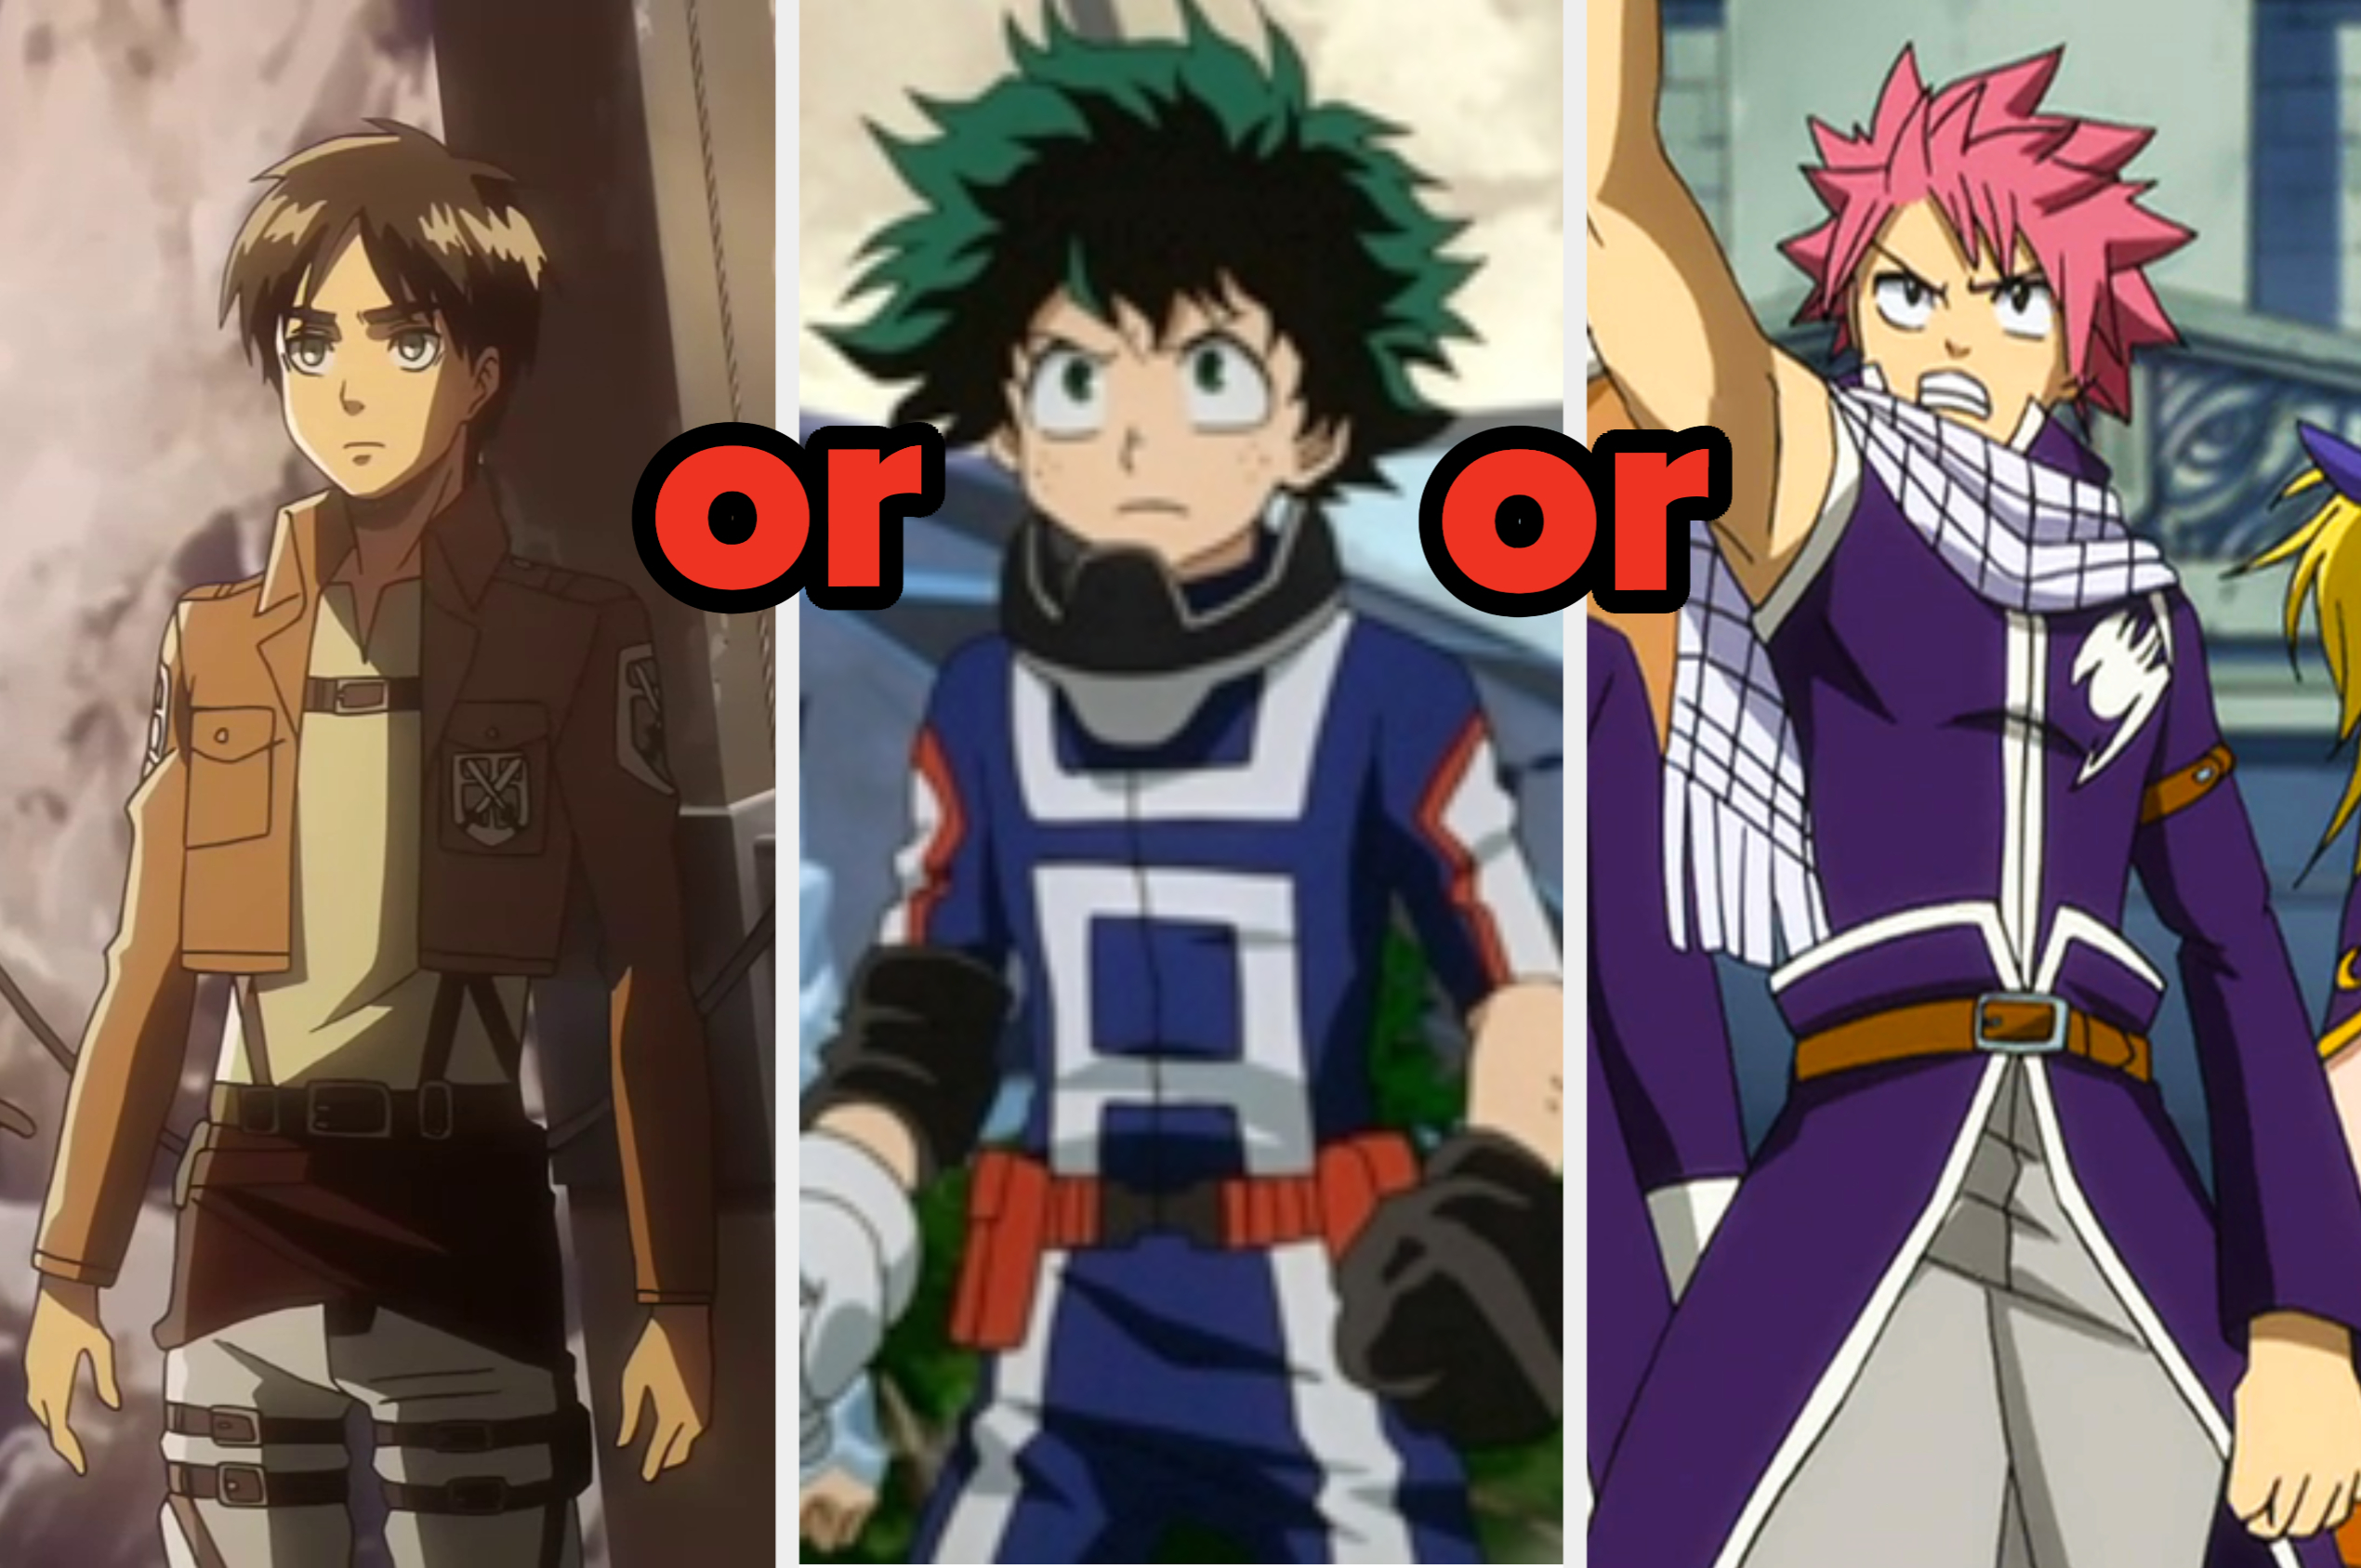 Can You Identify 6/10 Of These Anime Guys Correctly?